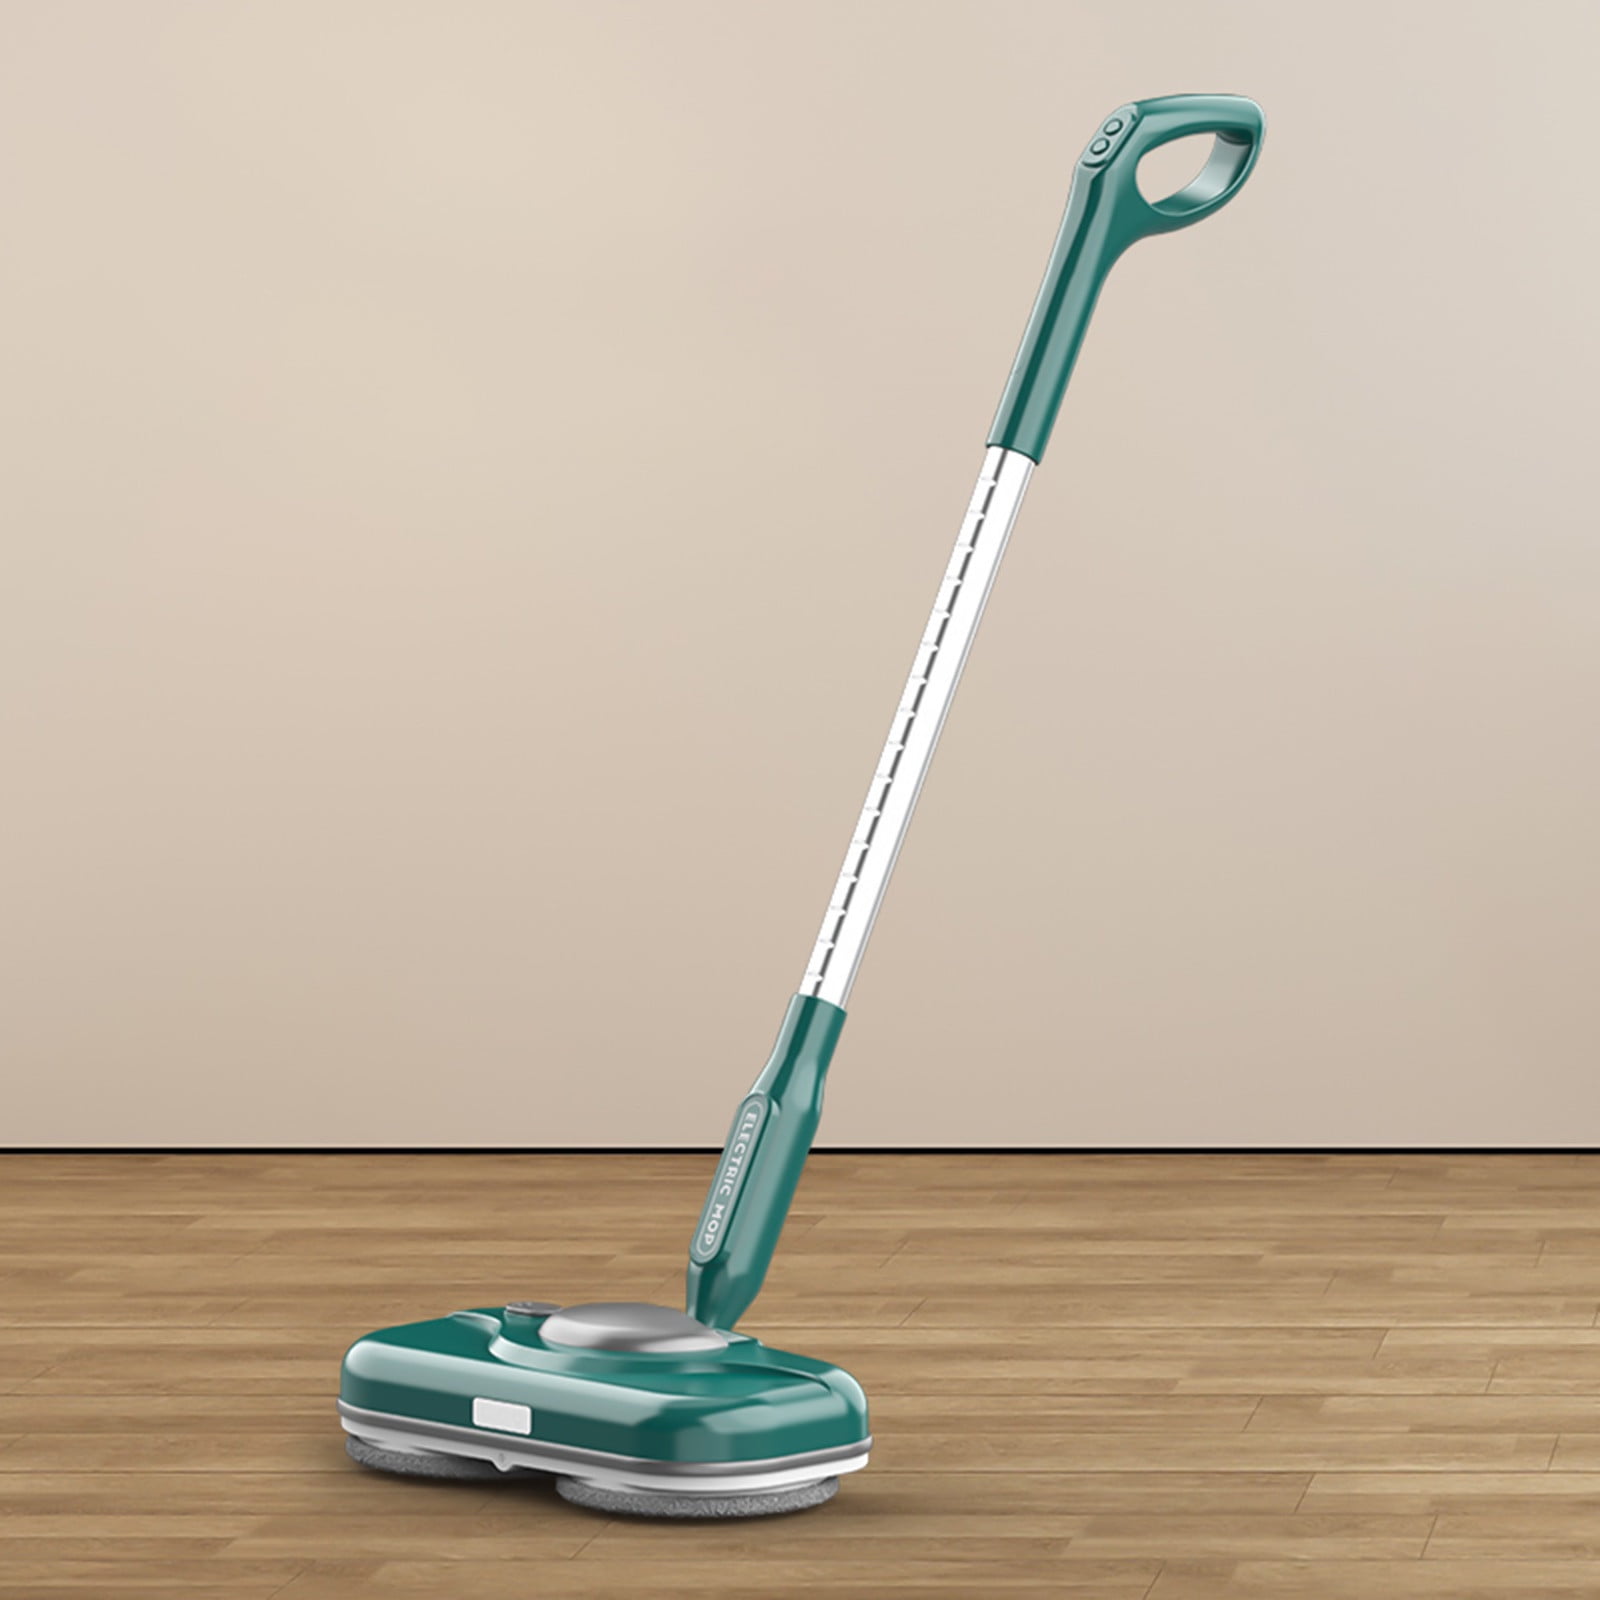 Mouliraty Electric Mop, Cordless Floor Cleaner LED Headlight and Water Sprayer, Up to 60 Mins Powerful Spin, Polisher Scrubber, Promotion on Sale